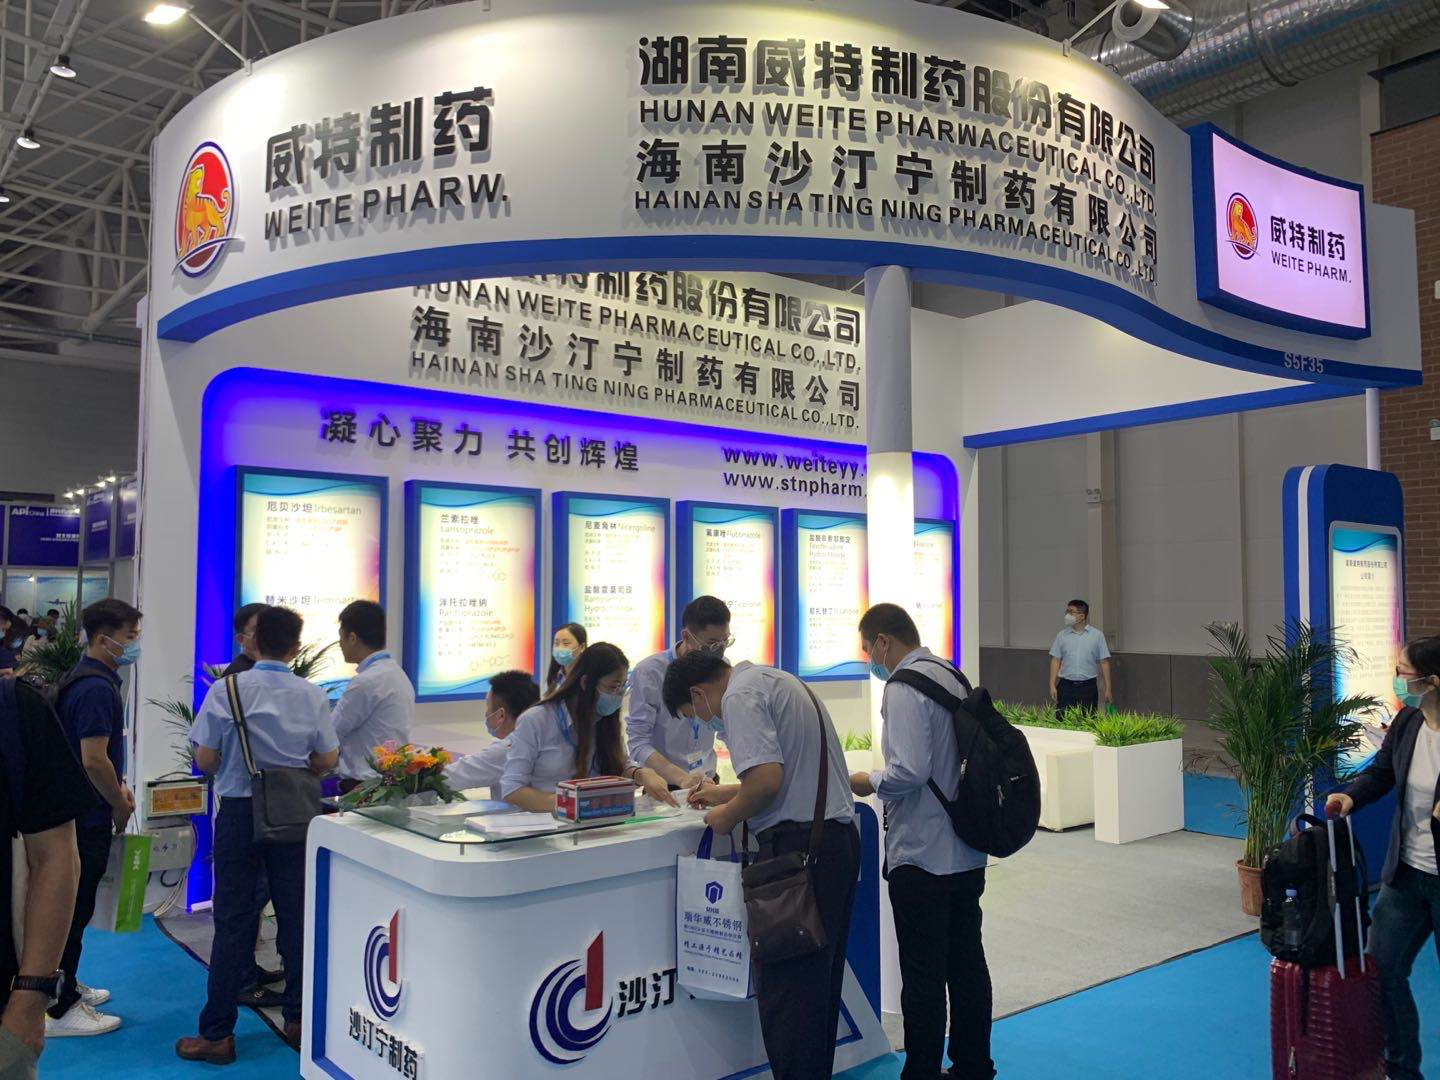 Hunan Weite Pharmaceutical Co., Ltd. participated in the 84th API Exhibition